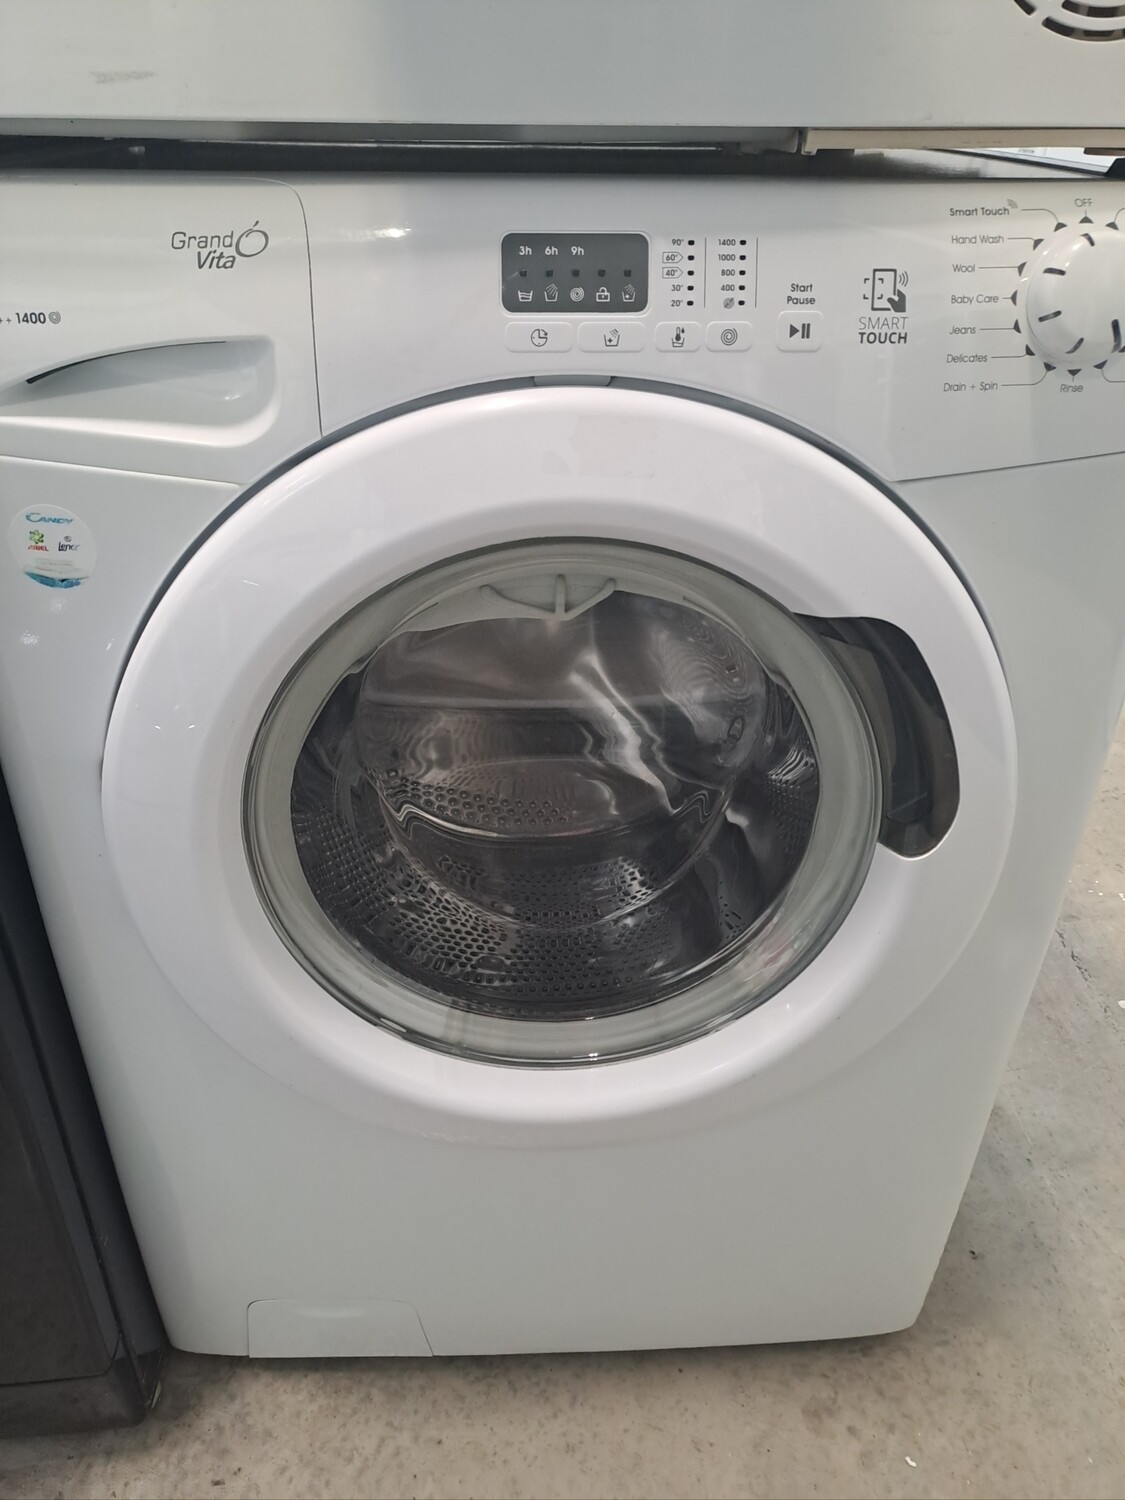 Candy CS148D3/1-80 A+++ 10kg Load 1400 Spin Washing Machine - White - Refurbished - 6 Month Guarantee